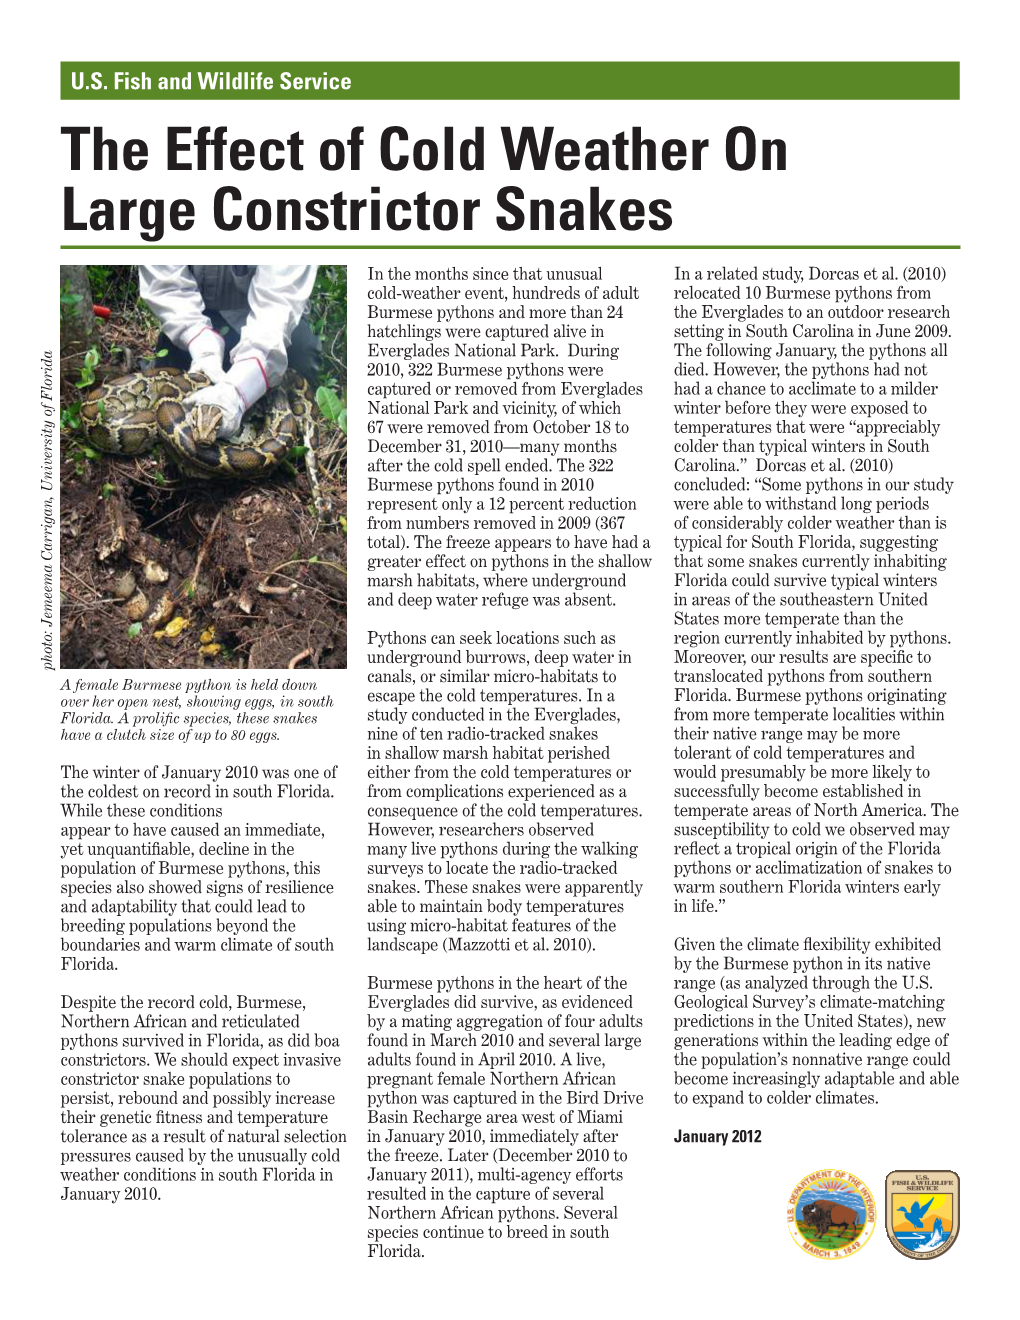 The Effect of Cold Weather on Large Constrictor Snakes